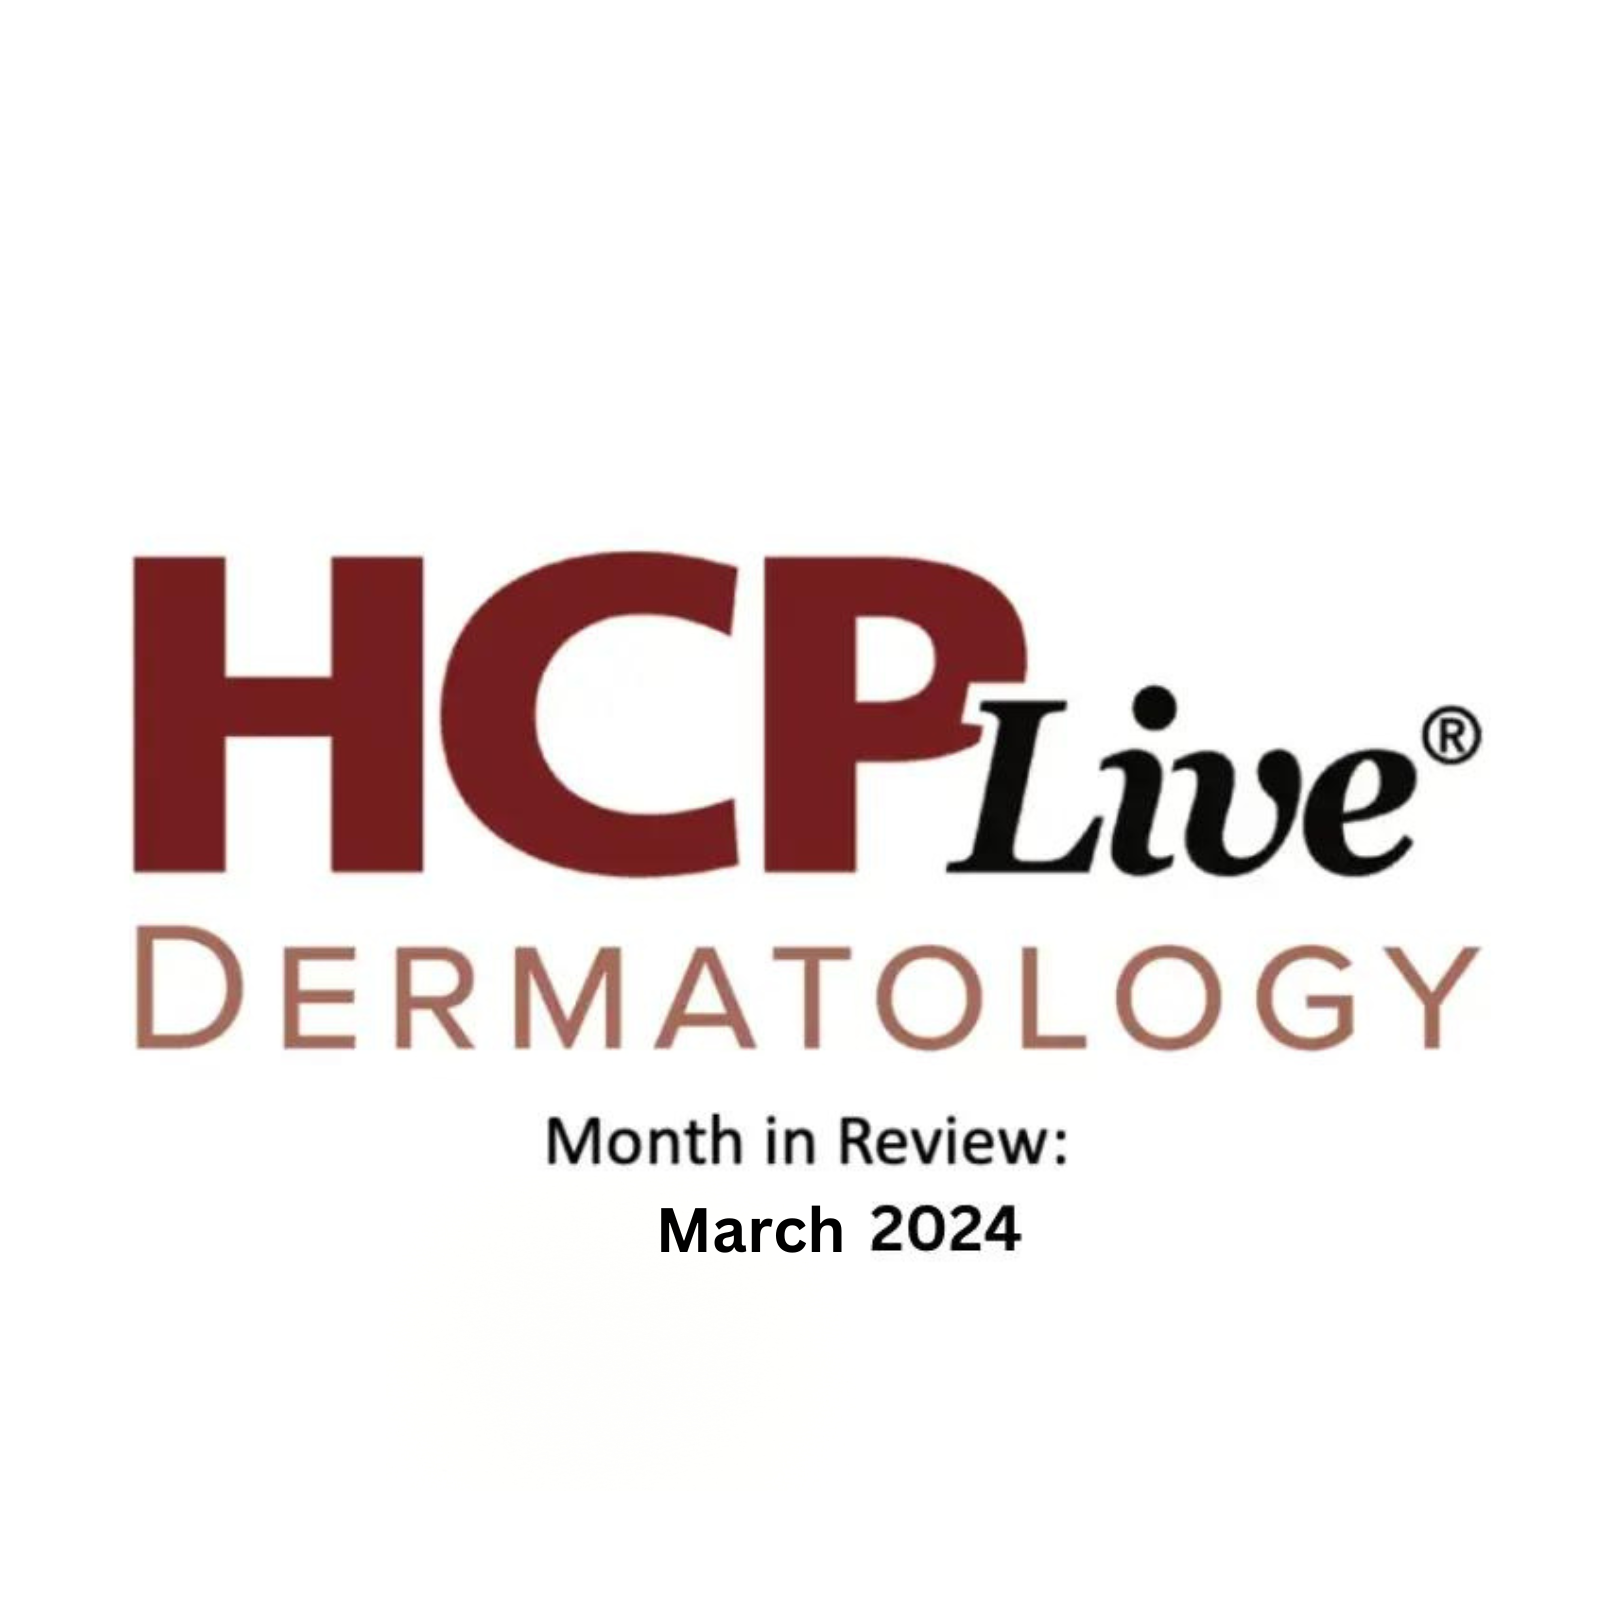 Dermatology Month in Review: March 2024